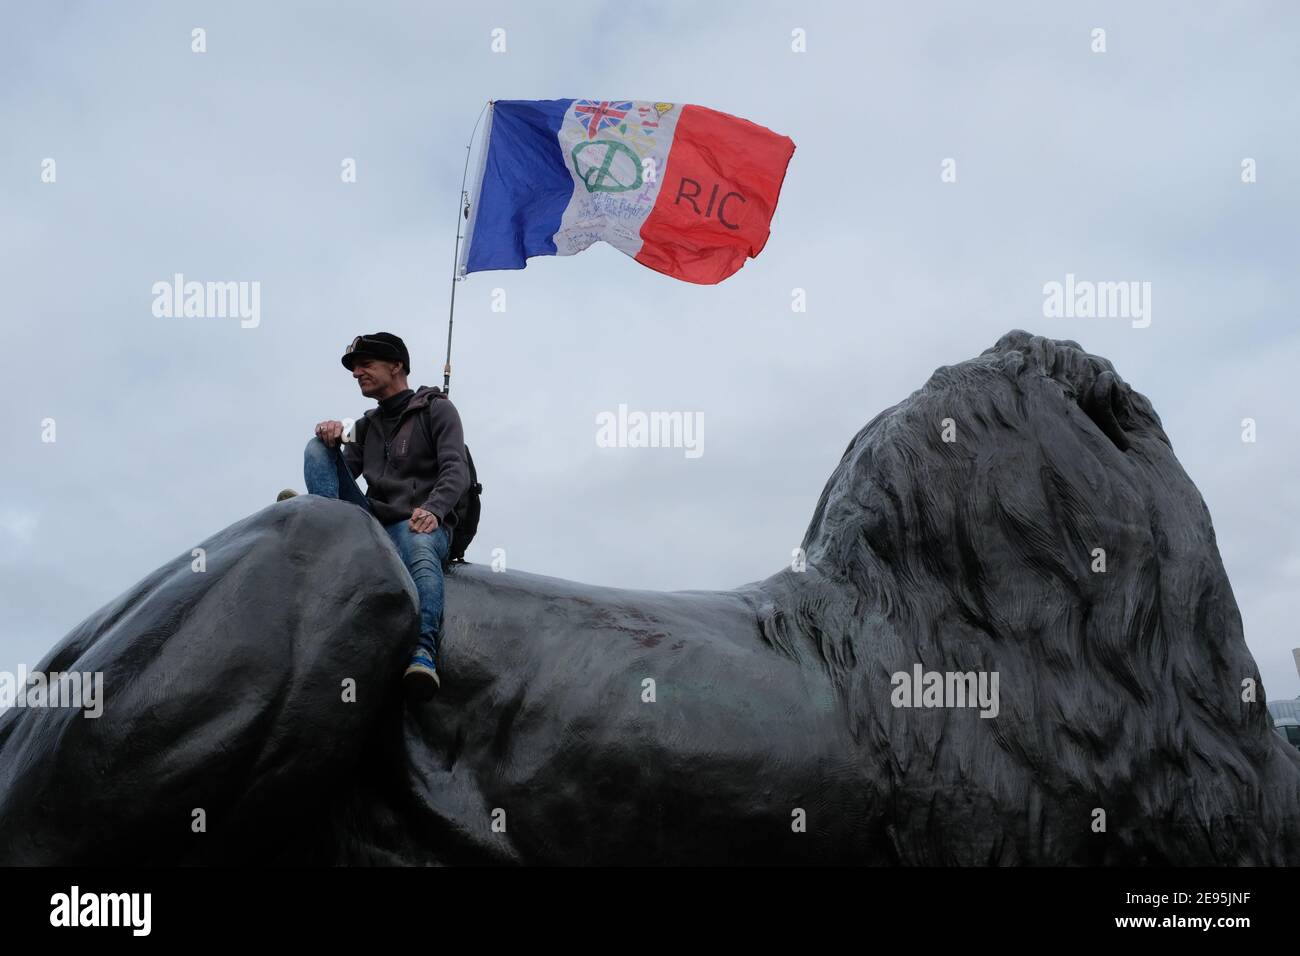 23RD MARCH 2019: A french RIC protester (Citizens' Initiative Referendum) sits on top of a Landseer Lion on Trafalgar Square in London. Stock Photo